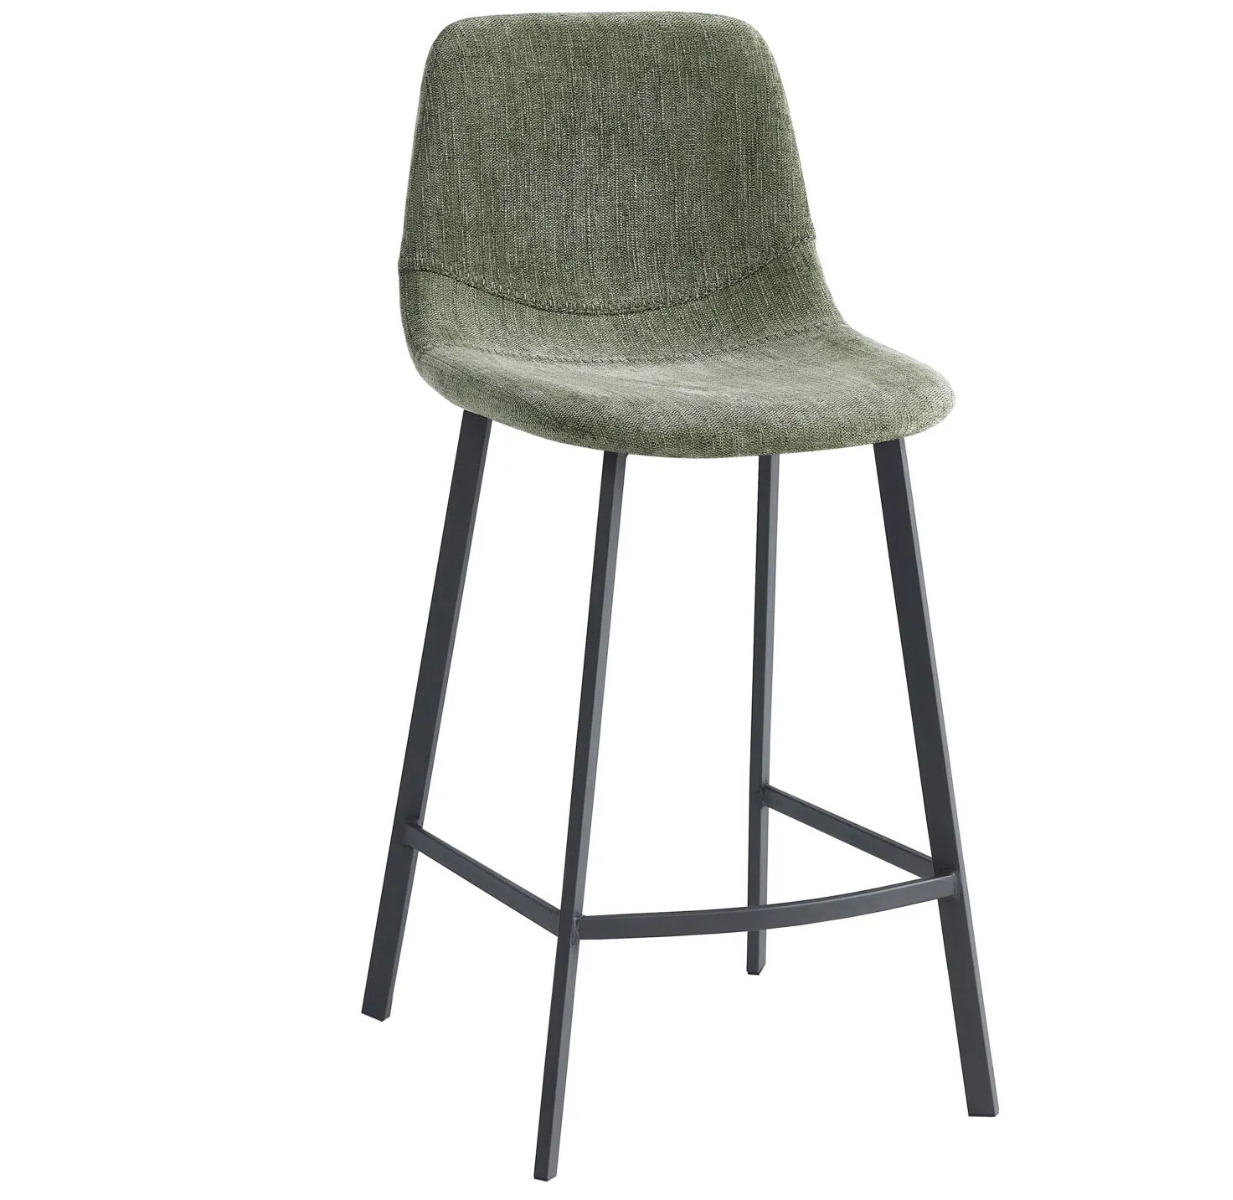 Alex counterstool in Green